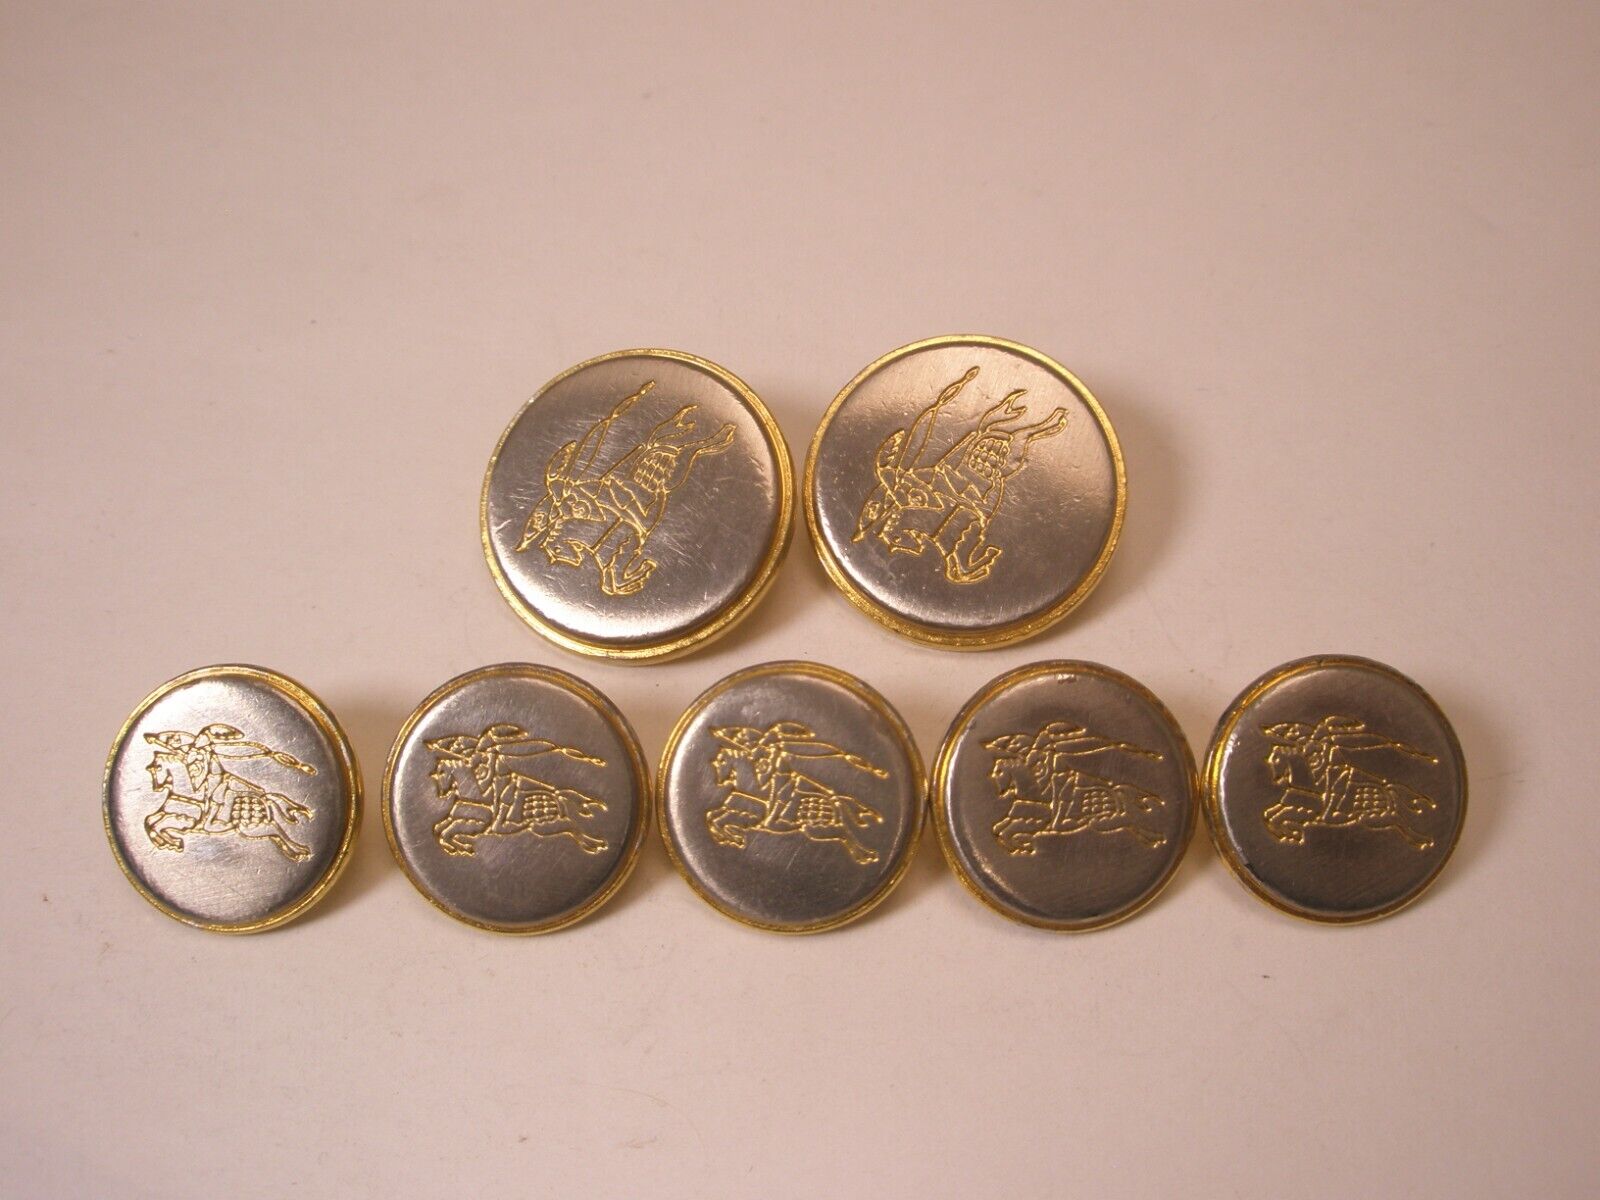 Vintage Military Uniform Buttons? 2 large, 5 small